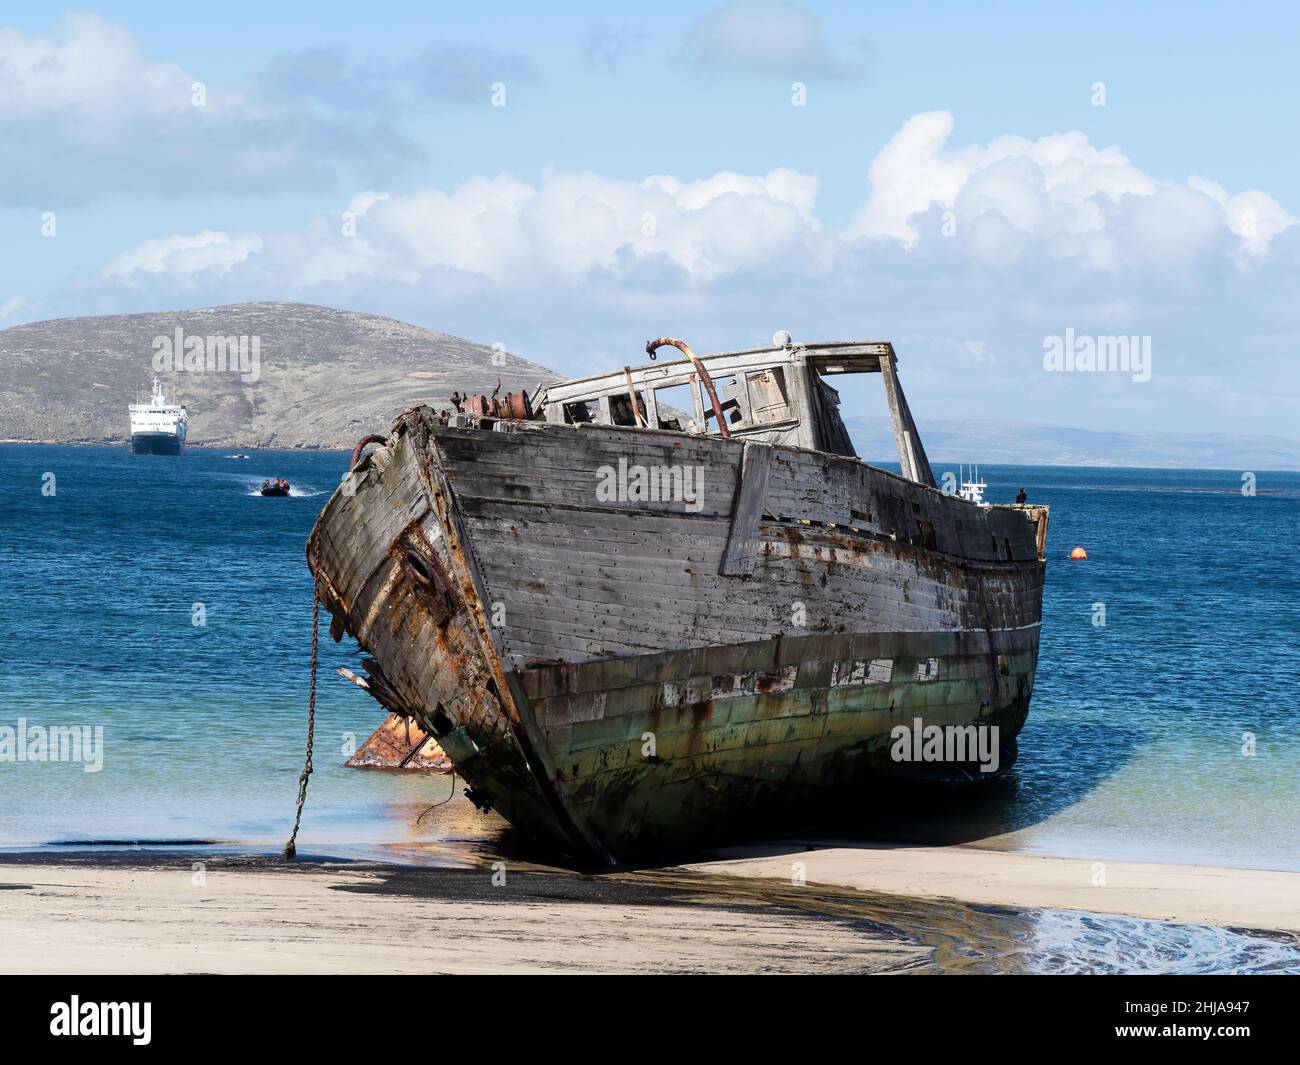 Wooden shipwreck on the beach at Coffin’s Harbour, New Island, Falkland Islands. Stock Photo